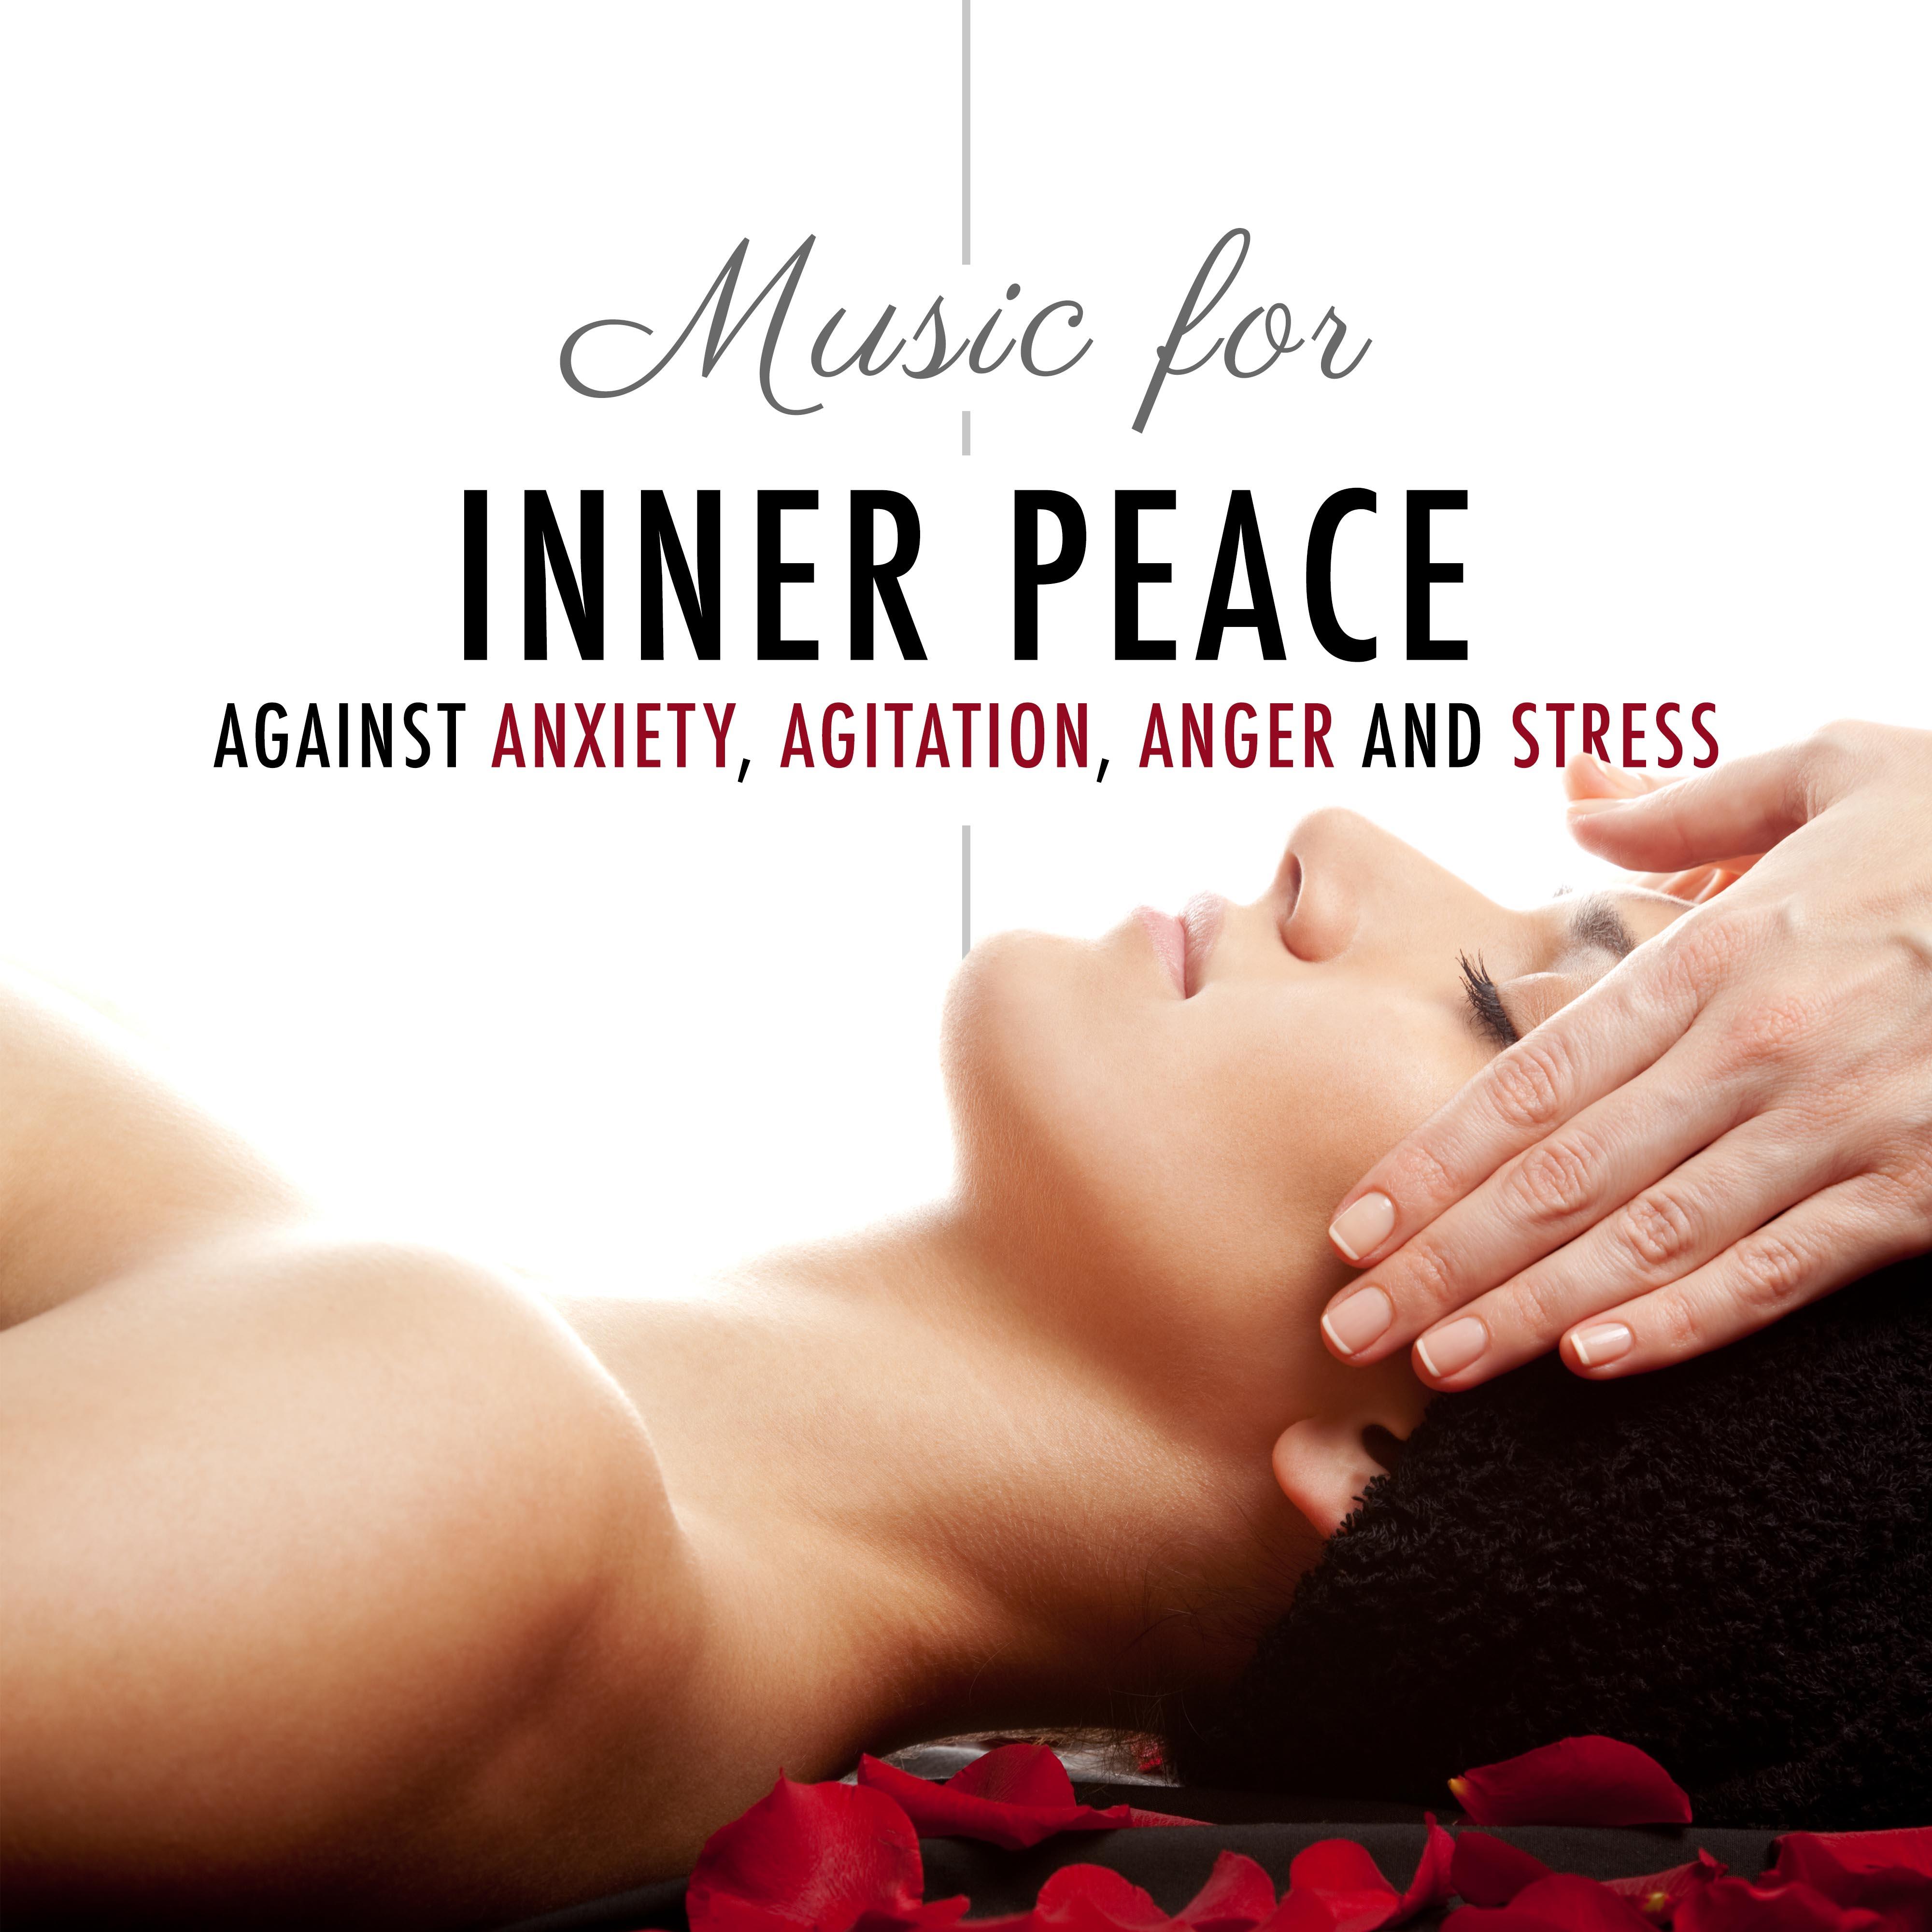 Inner Peace - Relaxing Music against Anxiety, Agitation, Anger and Stress